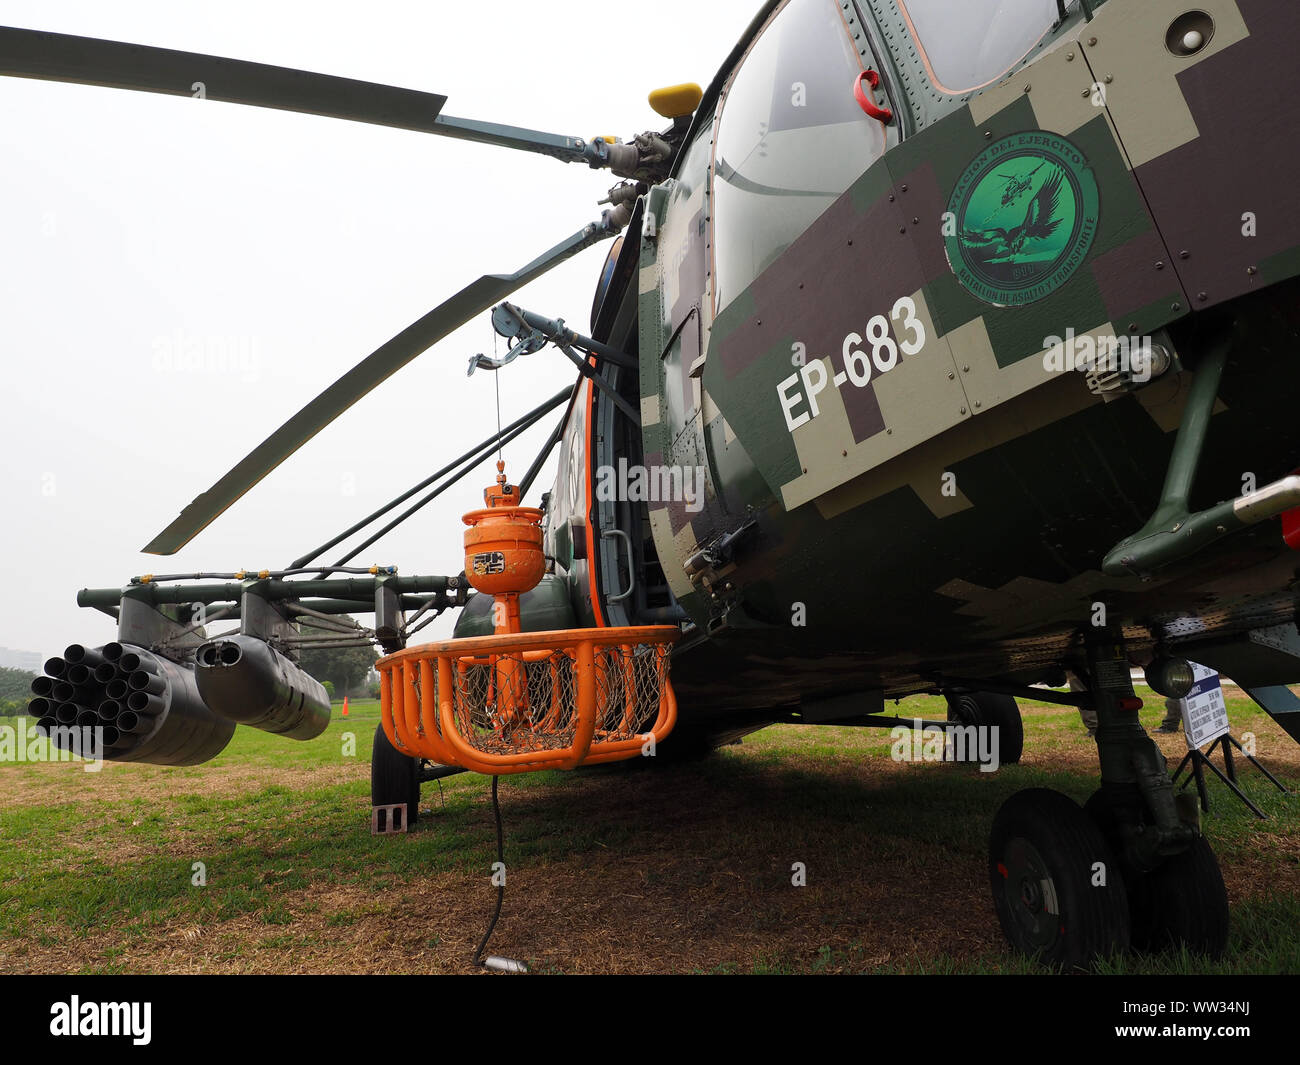 The Mil Mi-171Sh-P armed helicopter of the Peruvian Army displayed at the 7th edition of the International Defense Technology Exhibition, SITDEF, 2019, in the Headquarters of the Peruvian Army. The event is held from May 16th to 19th with the presence of representatives from 28 countries. Stock Photo